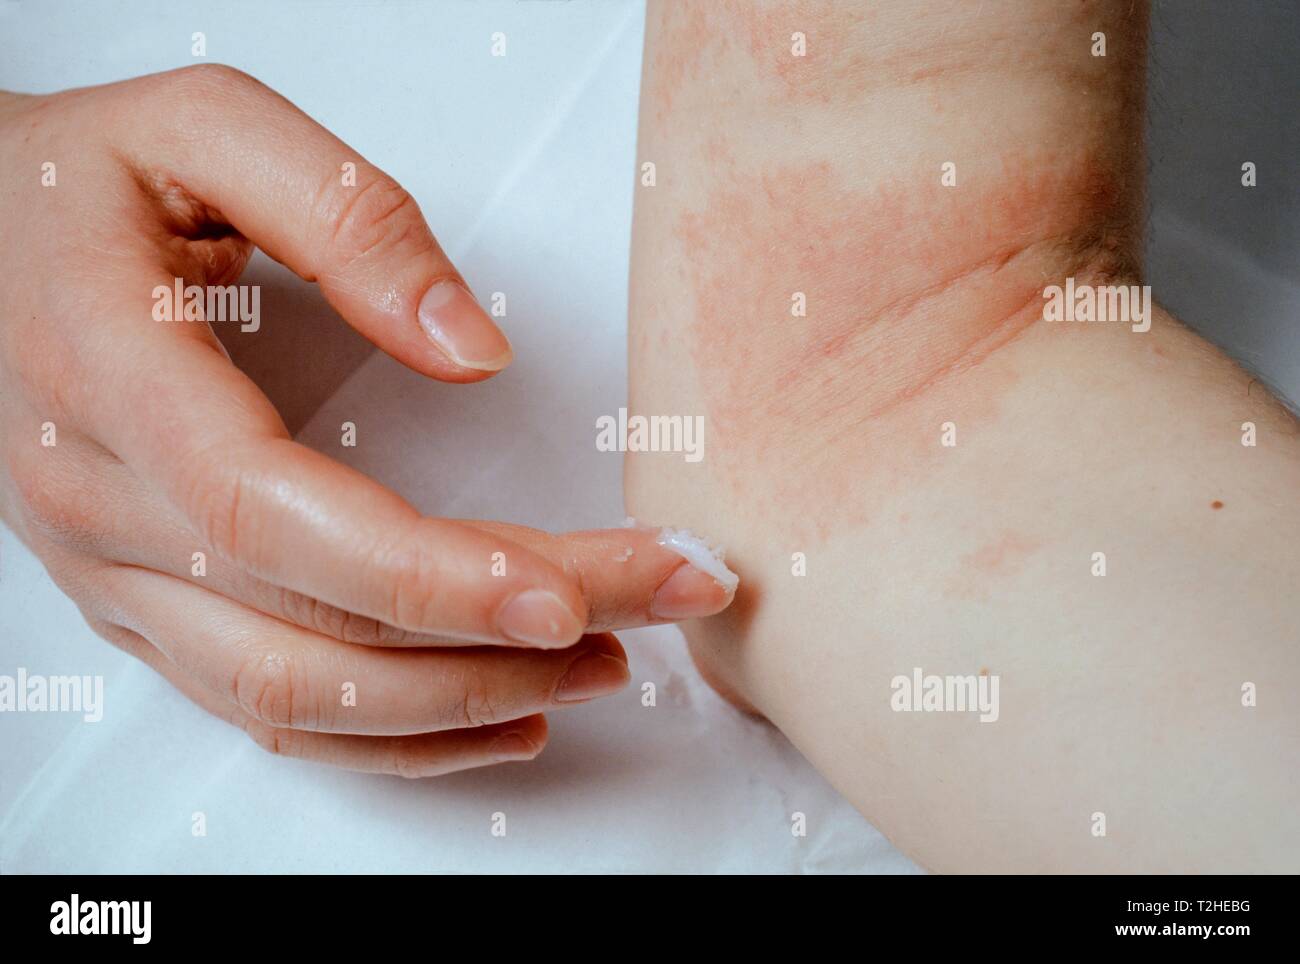 Woman applying ointment to eczema at the elbow, Germany Stock Photo